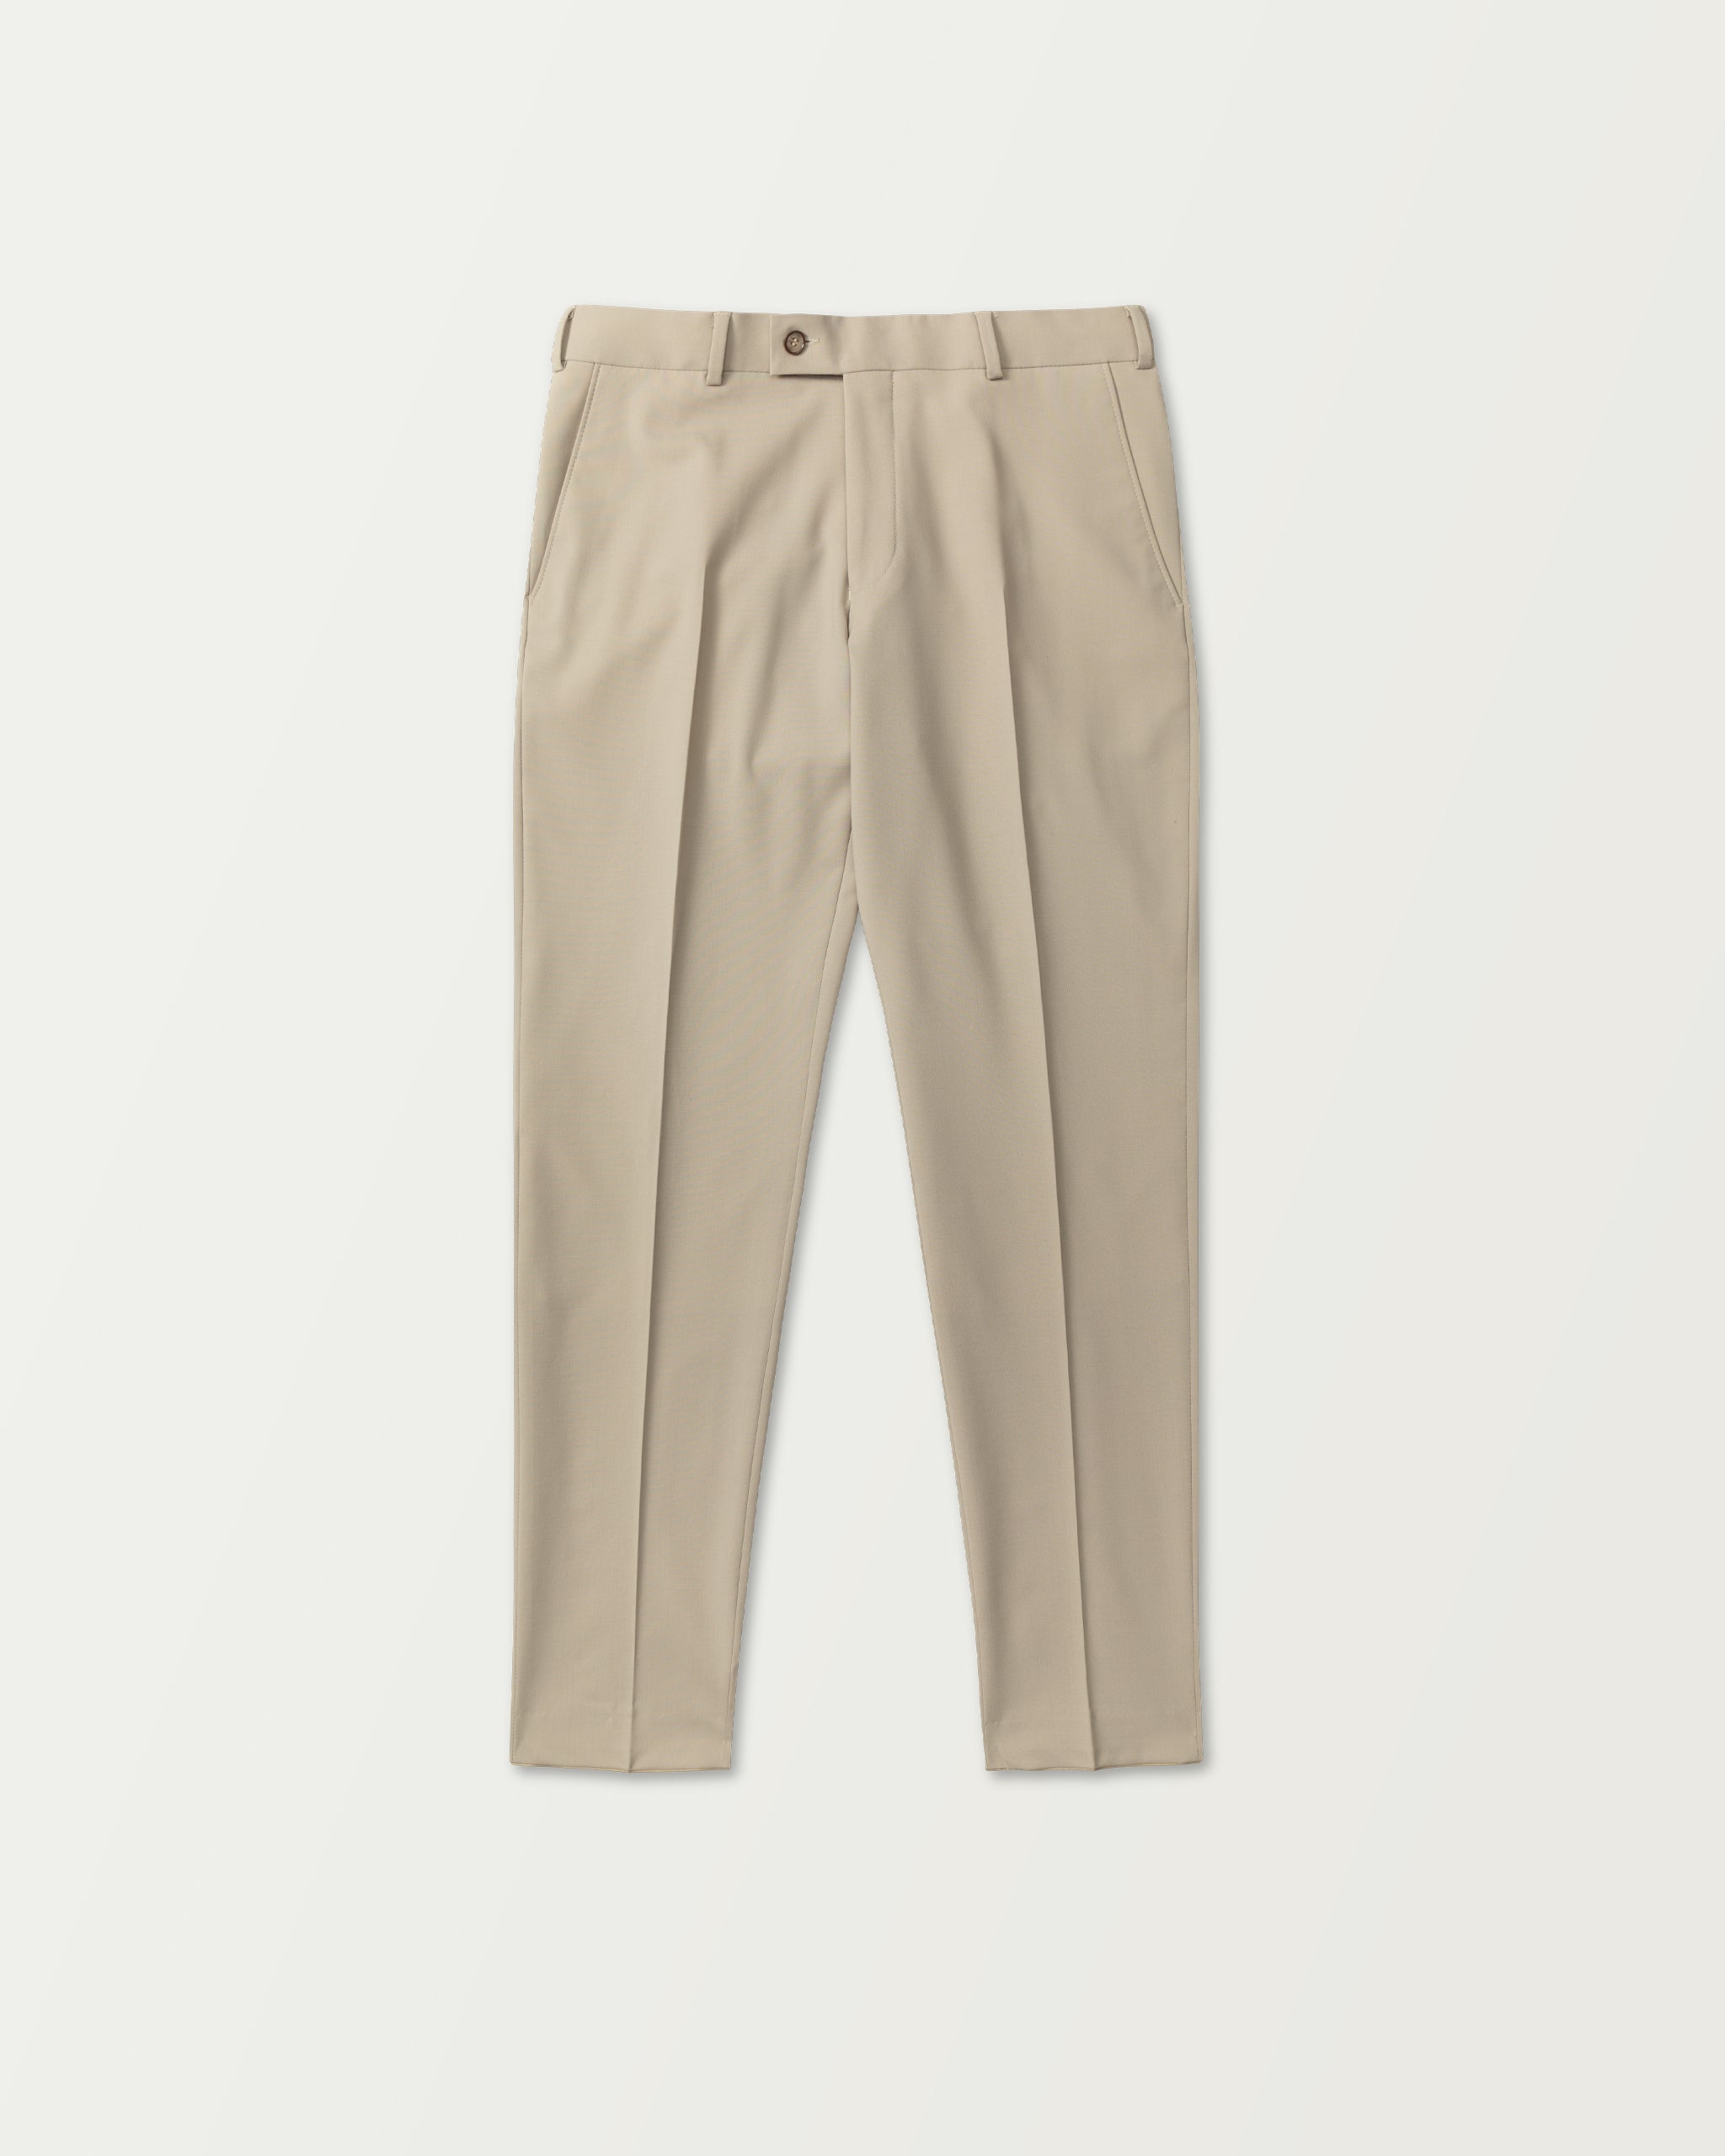 Turo - Stretch Wool Suit in Athlete fit Light Beige Trousers